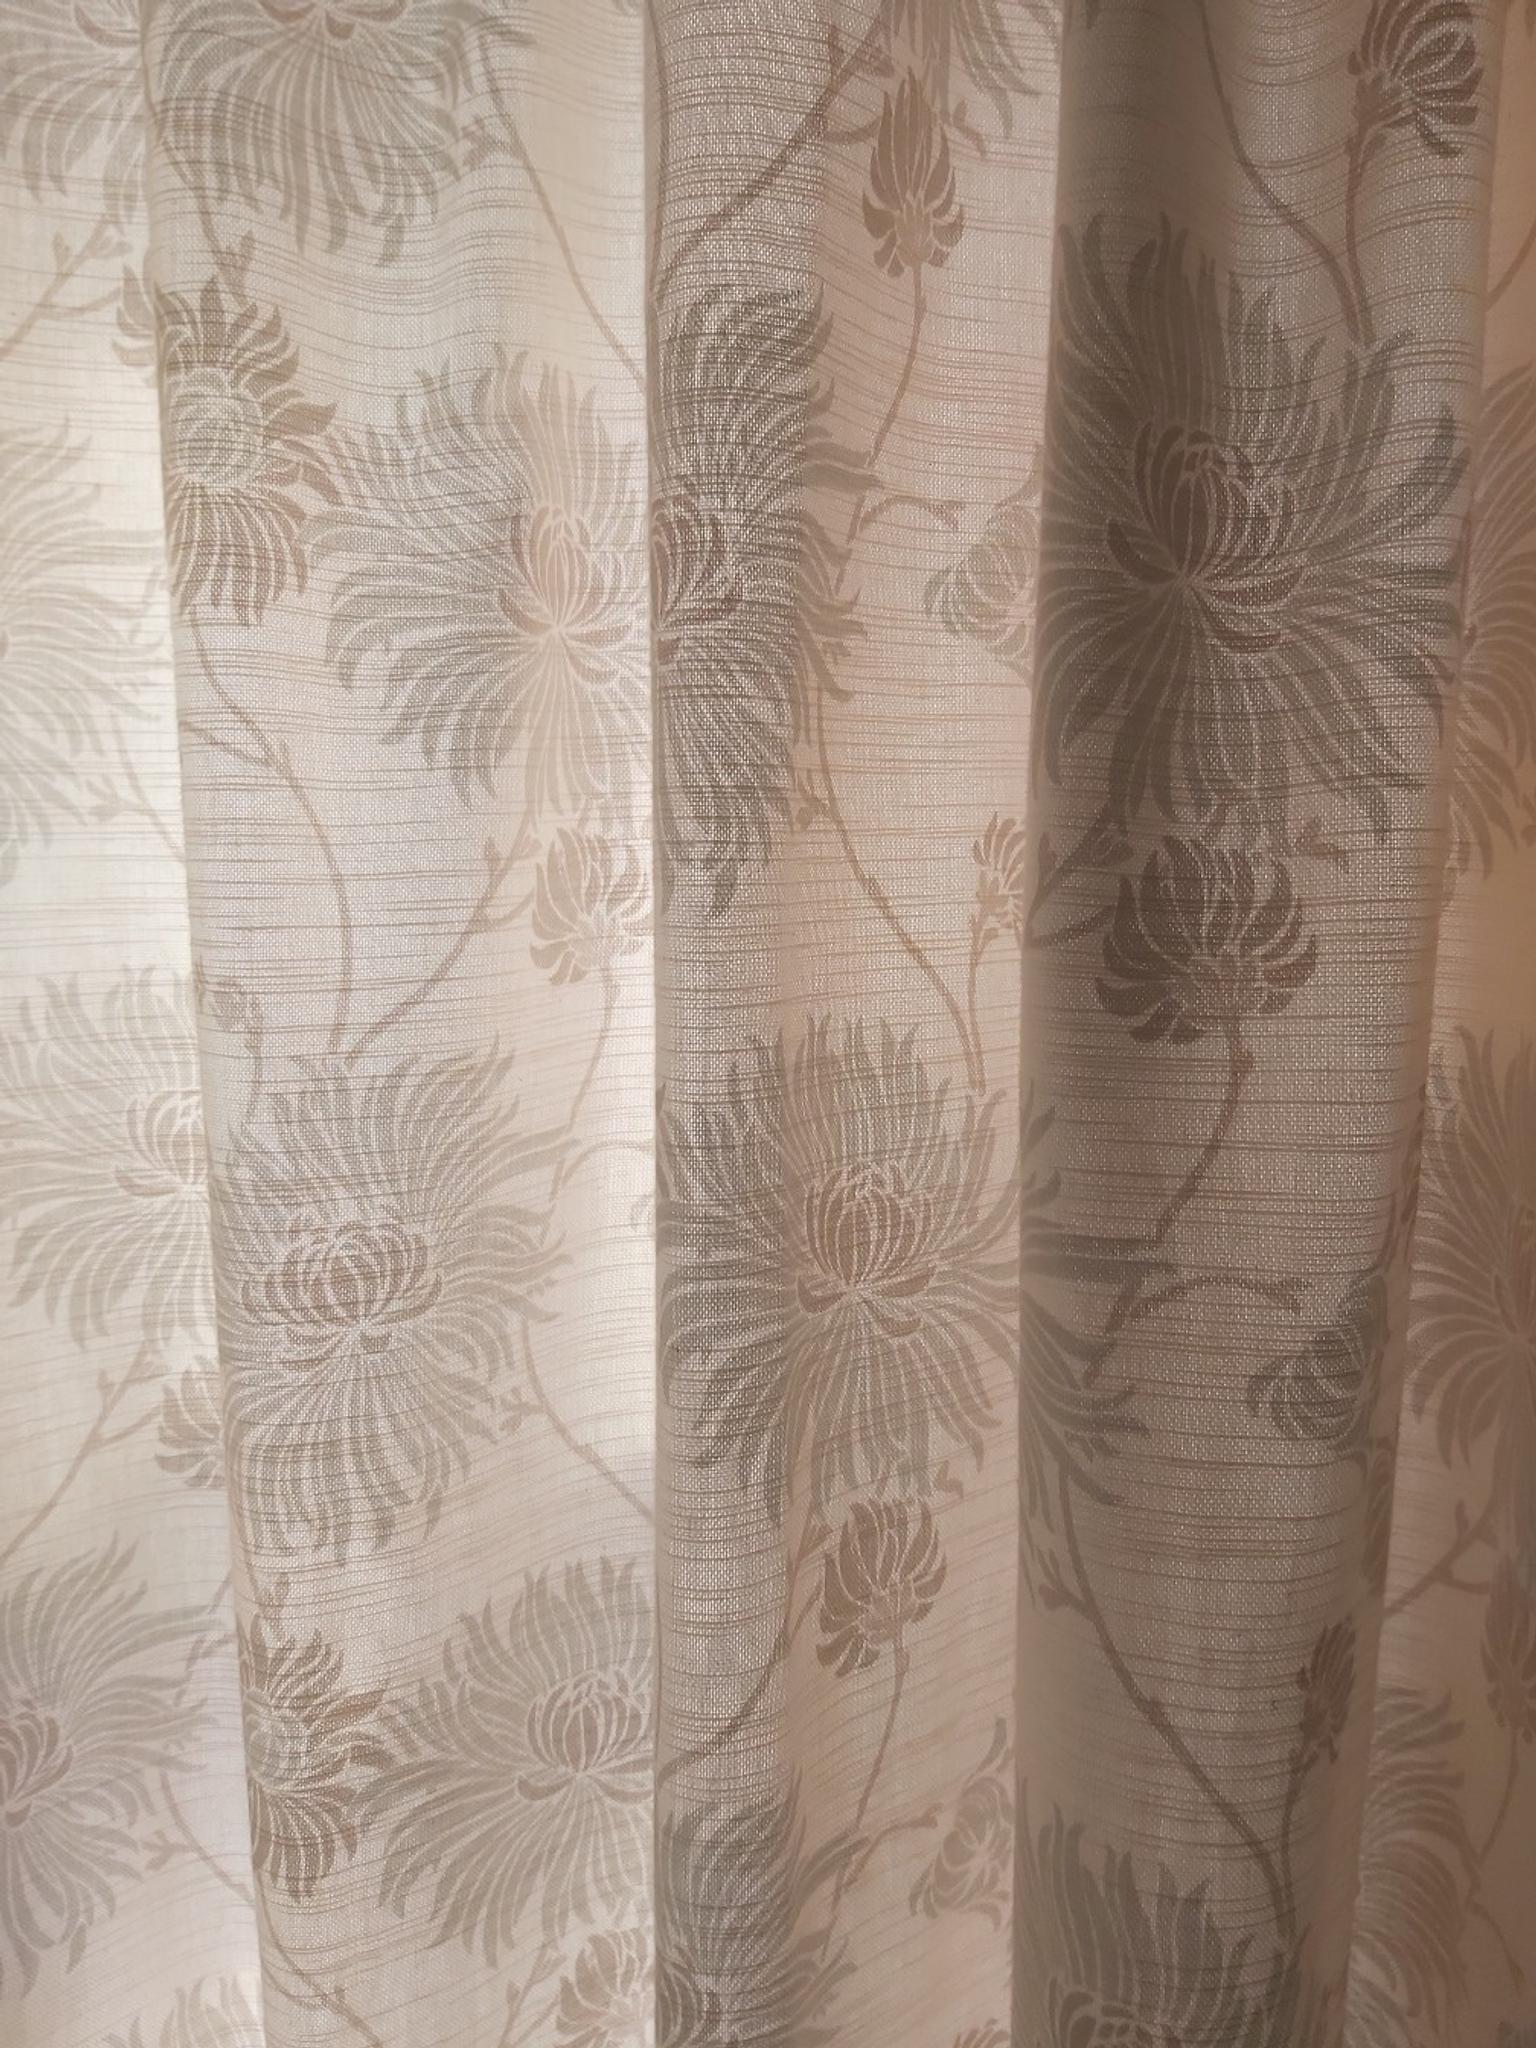 Laura Ashley Duckegg Kimono Curtains 2 Pairs In Dy8 Dudley For 20 00 For Sale Shpock Find many great new & used options and get the best deals for laura ashley curtains kimono duck egg at the best online prices at ebay! shpock